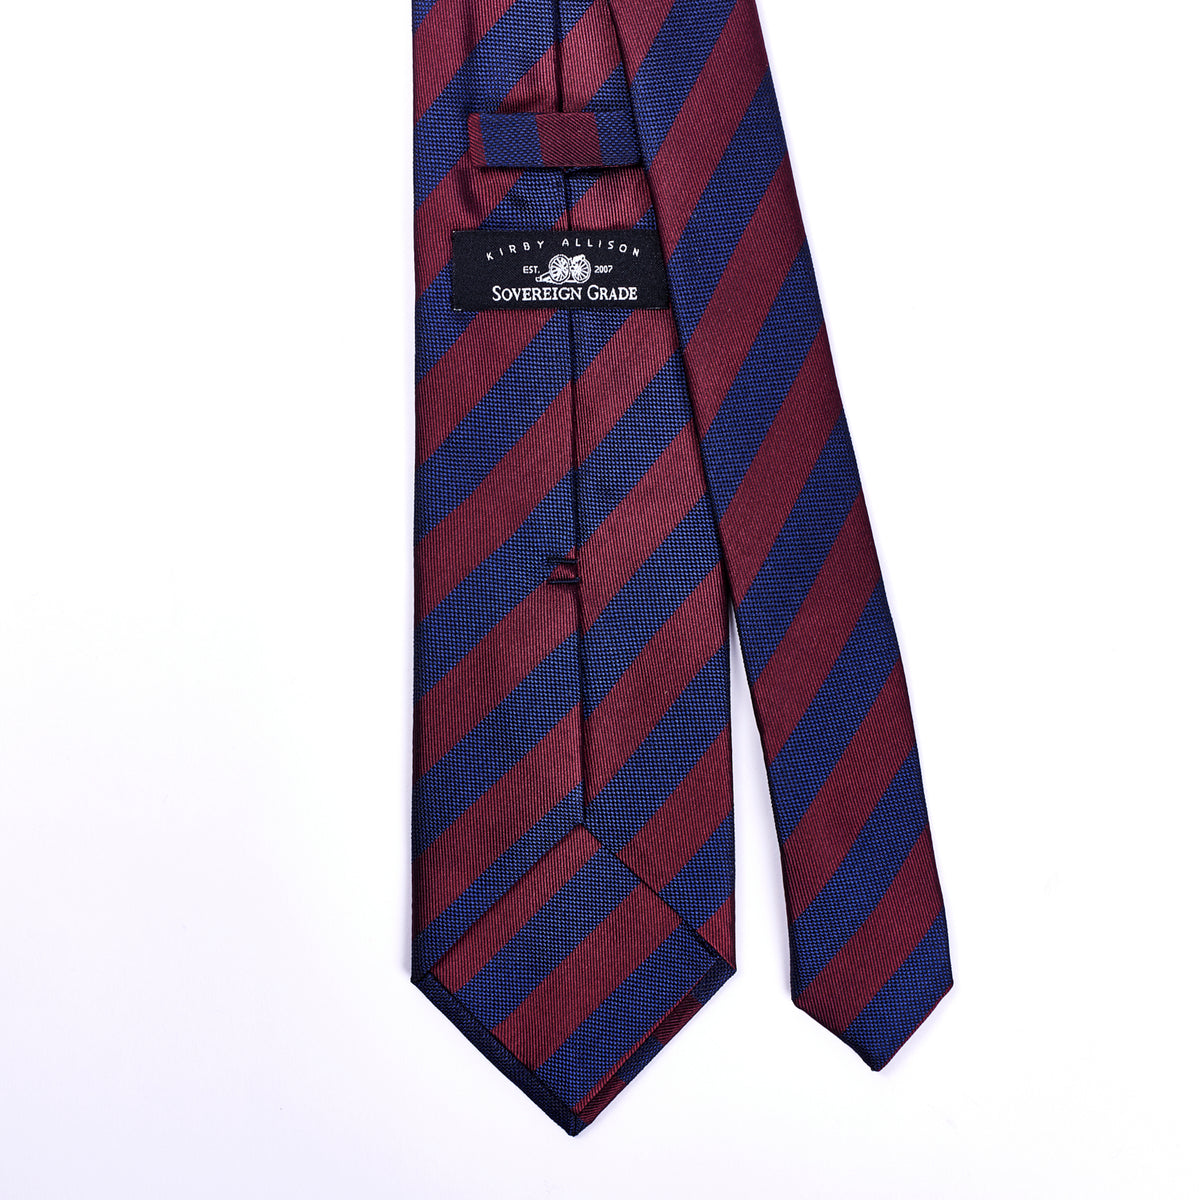 A red and blue striped KirbyAllison.com Sovereign Grade Woven Navy and Burgundy Rep Tie, 150 cm handmade in the United Kingdom.